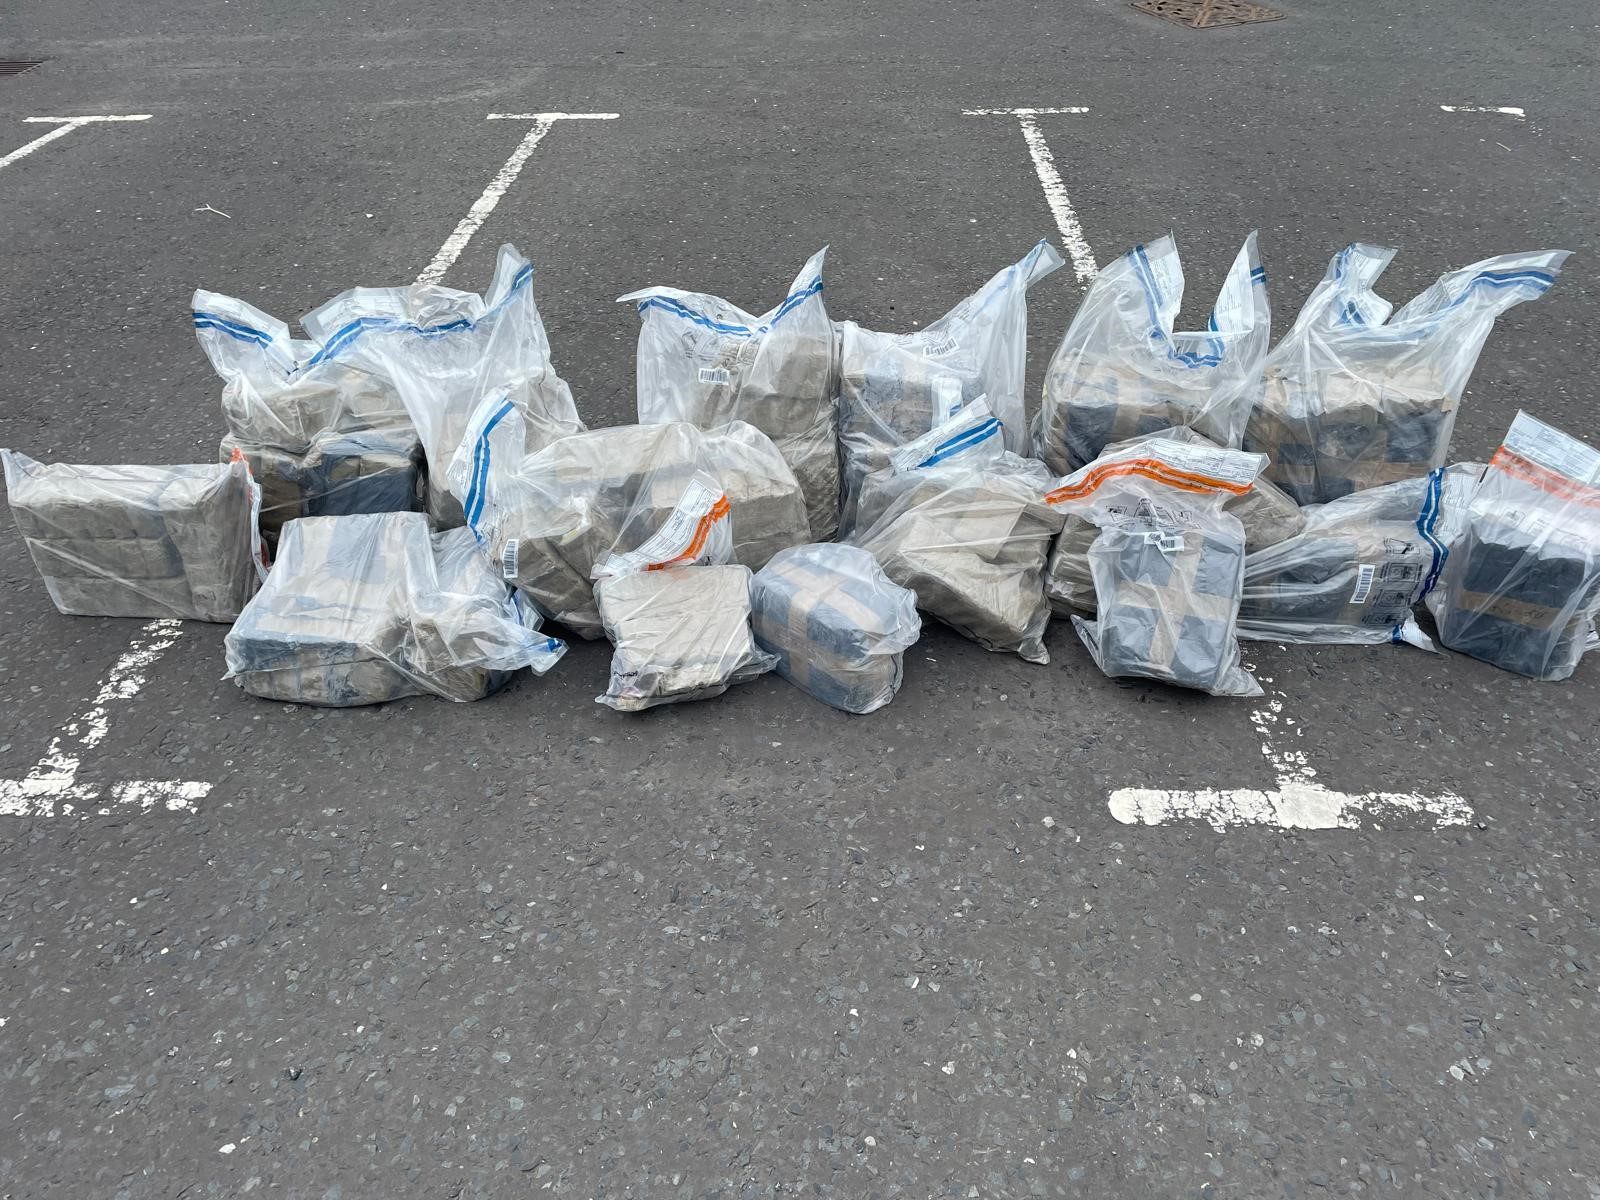 Two men charged following £2.1 million seizure in Co. Tyrone